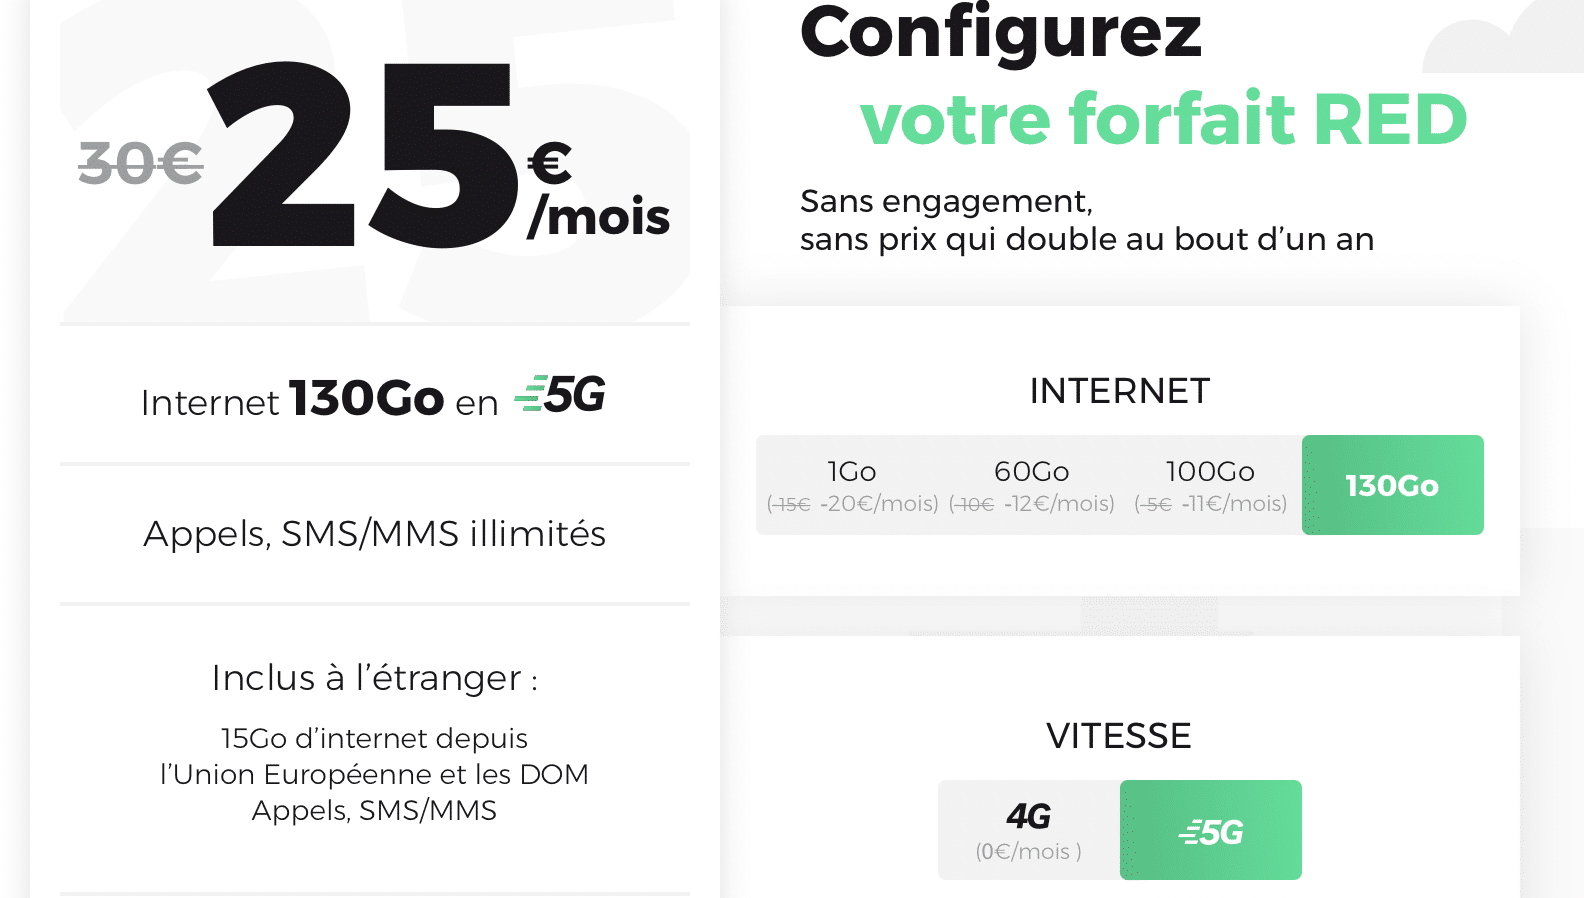 Forfait 5G RED